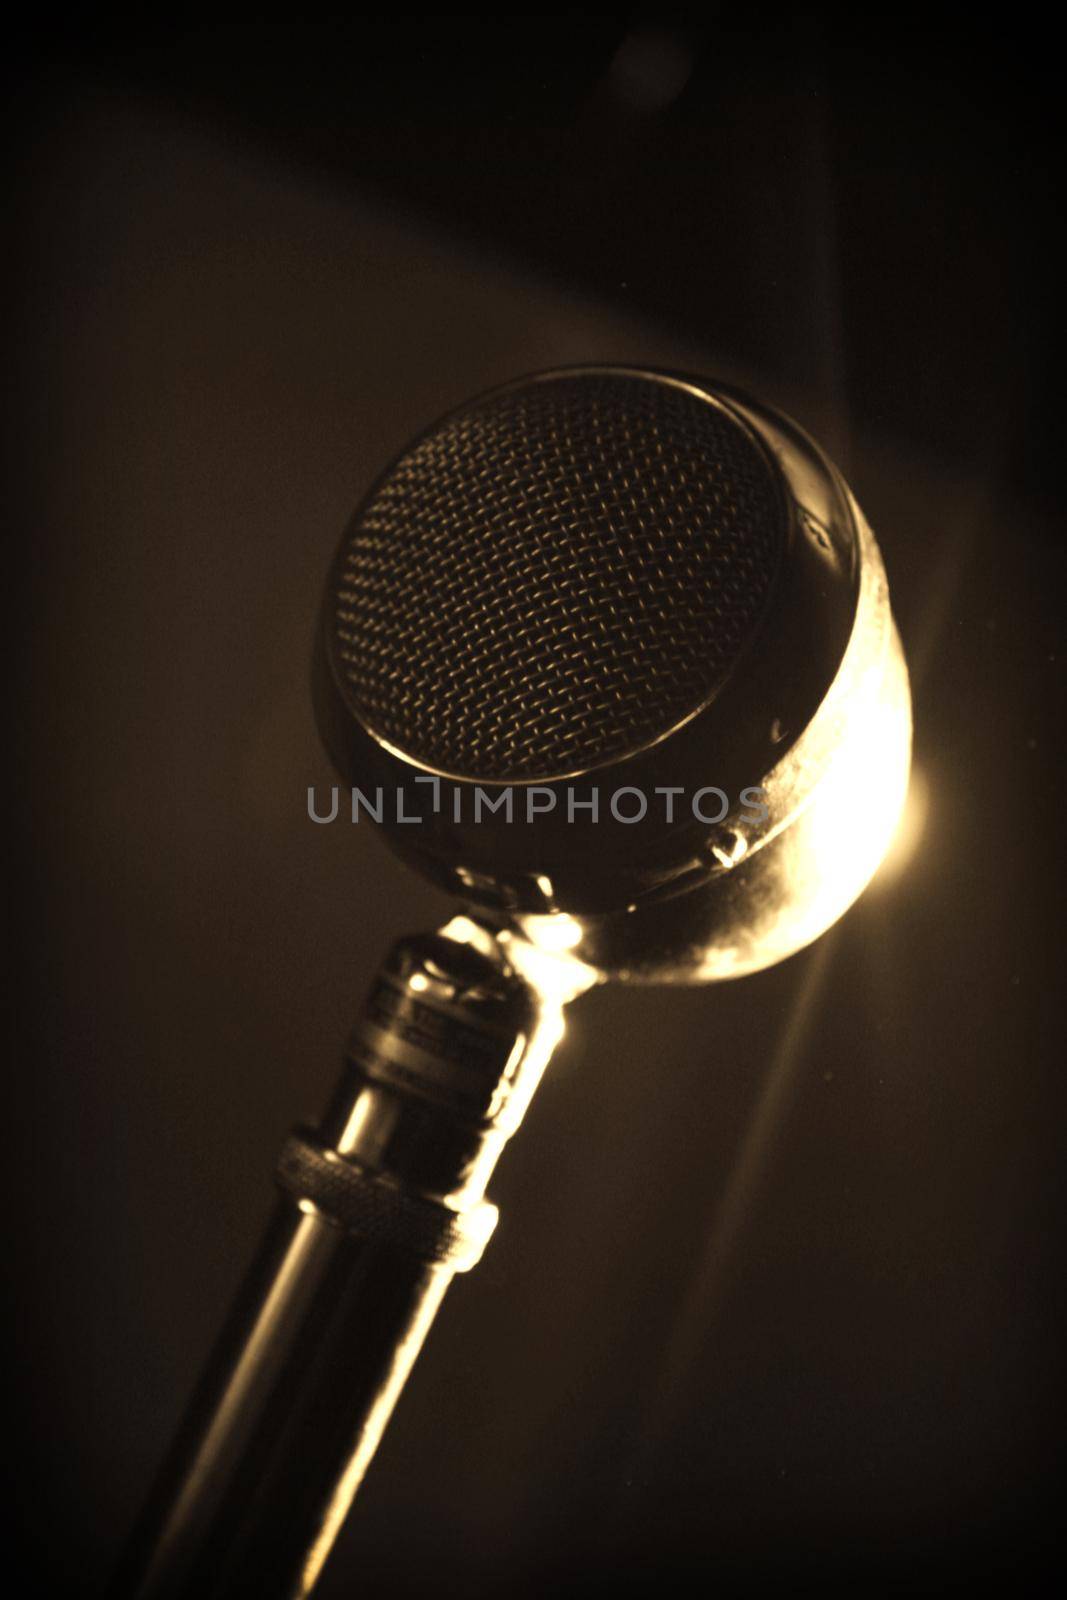 Old metal circular microphone with a gold lens flare by njproductions